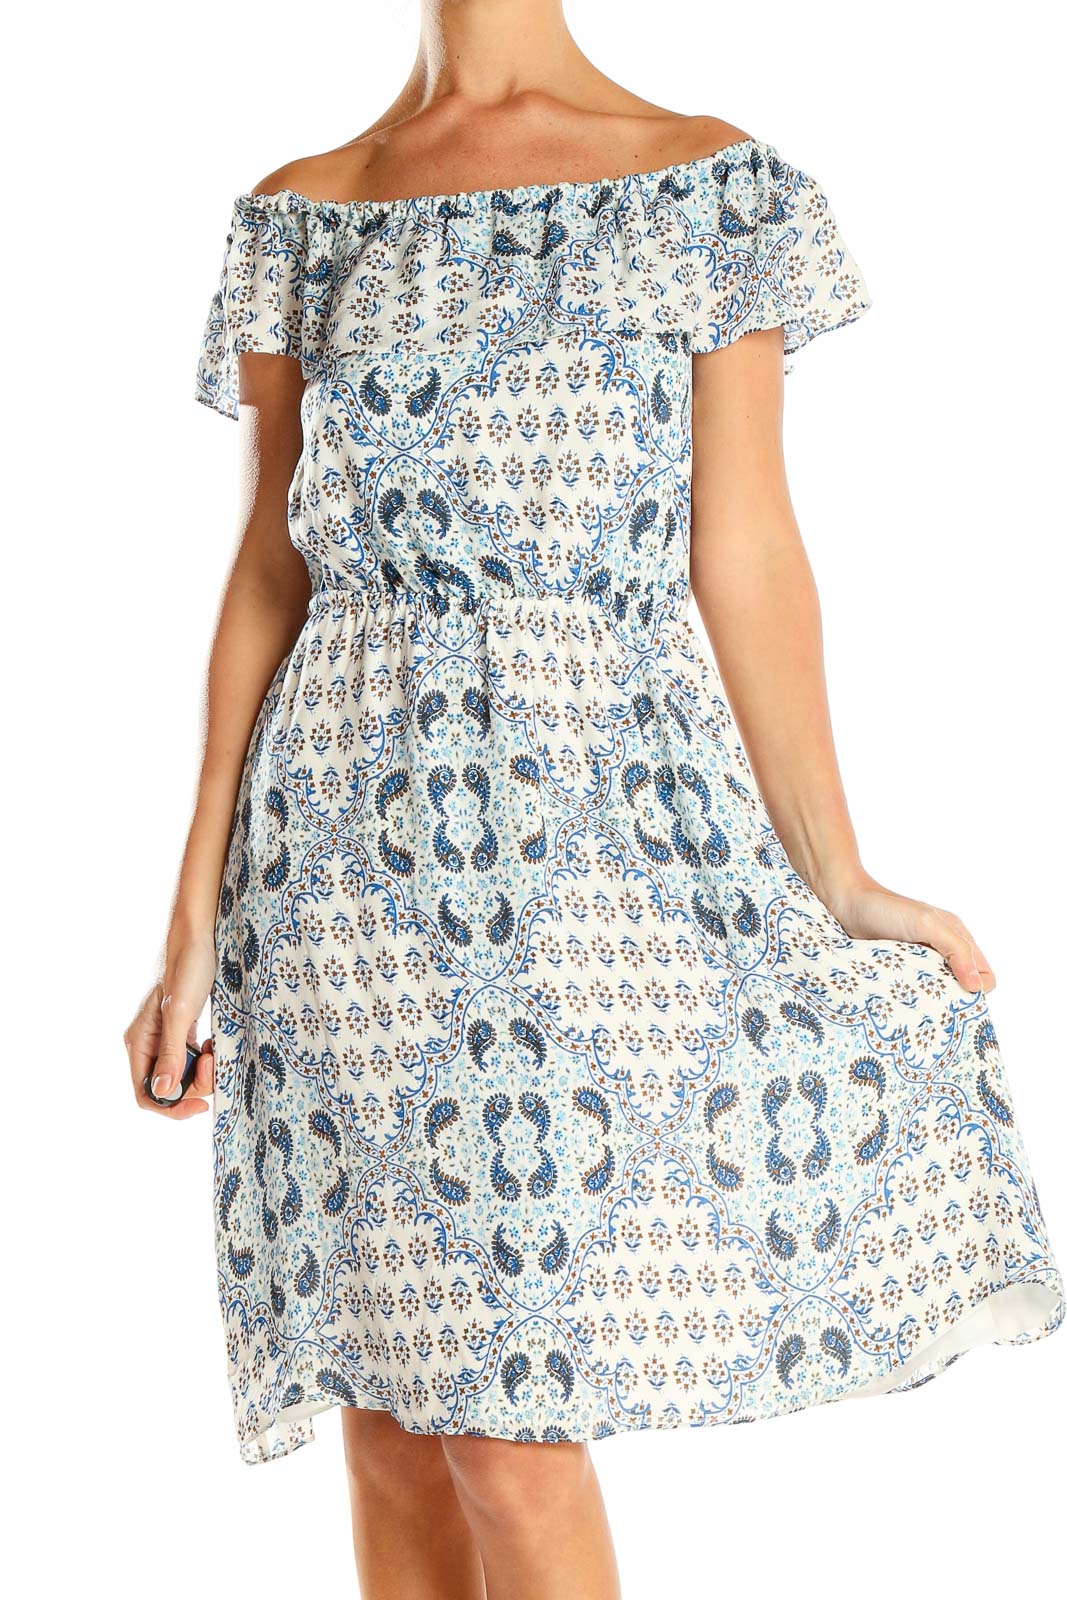 White Blue Paisley Off The Shoulder Dress Front